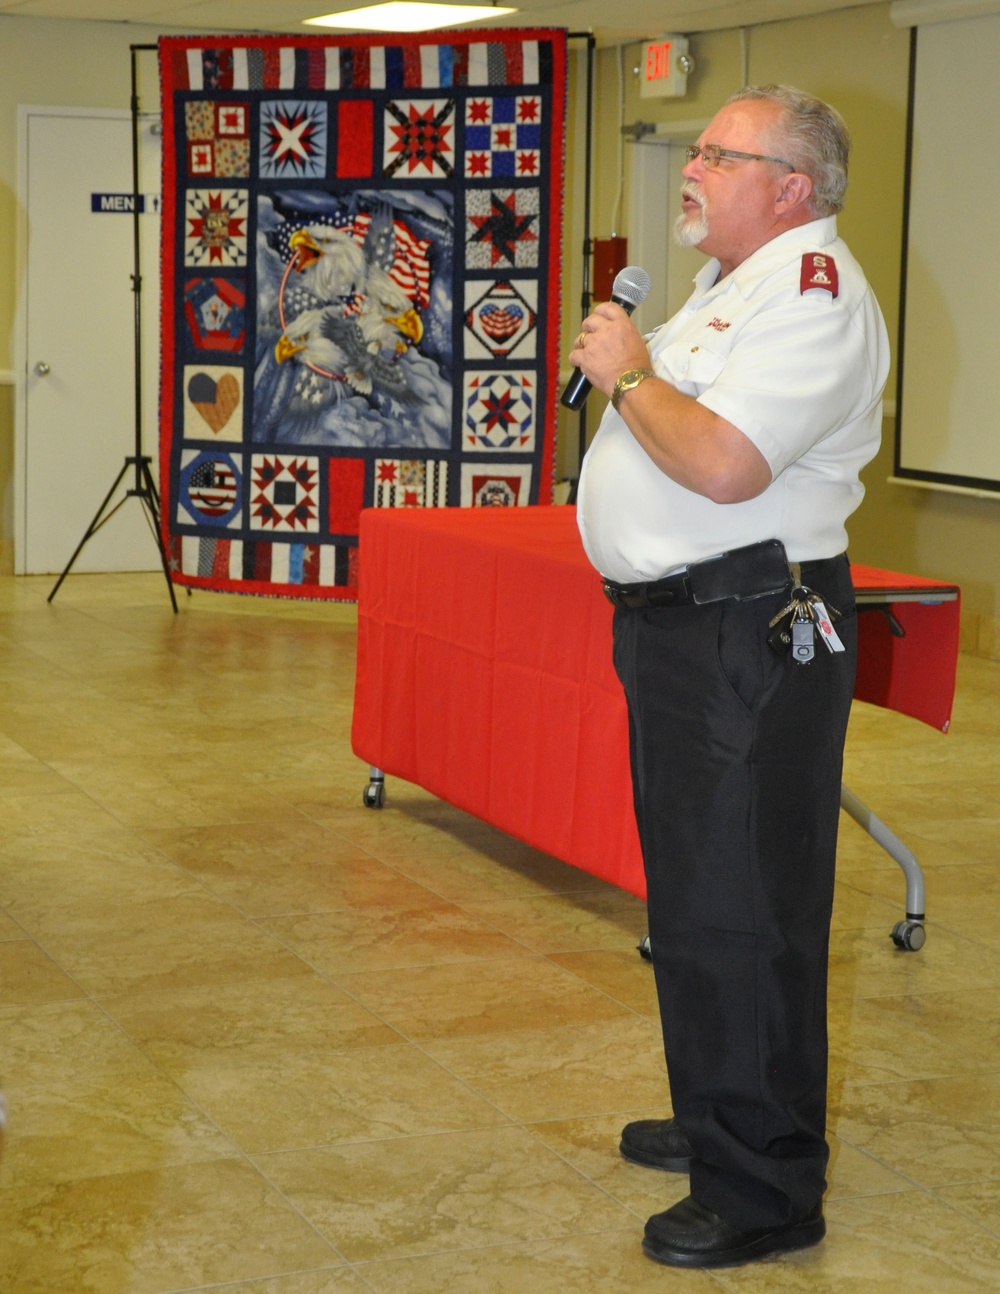 Major David Ebel, pastor with The Salvation Army, offers opening prayer at farewell lunch for Colonel Michael L. Scalise, June 25